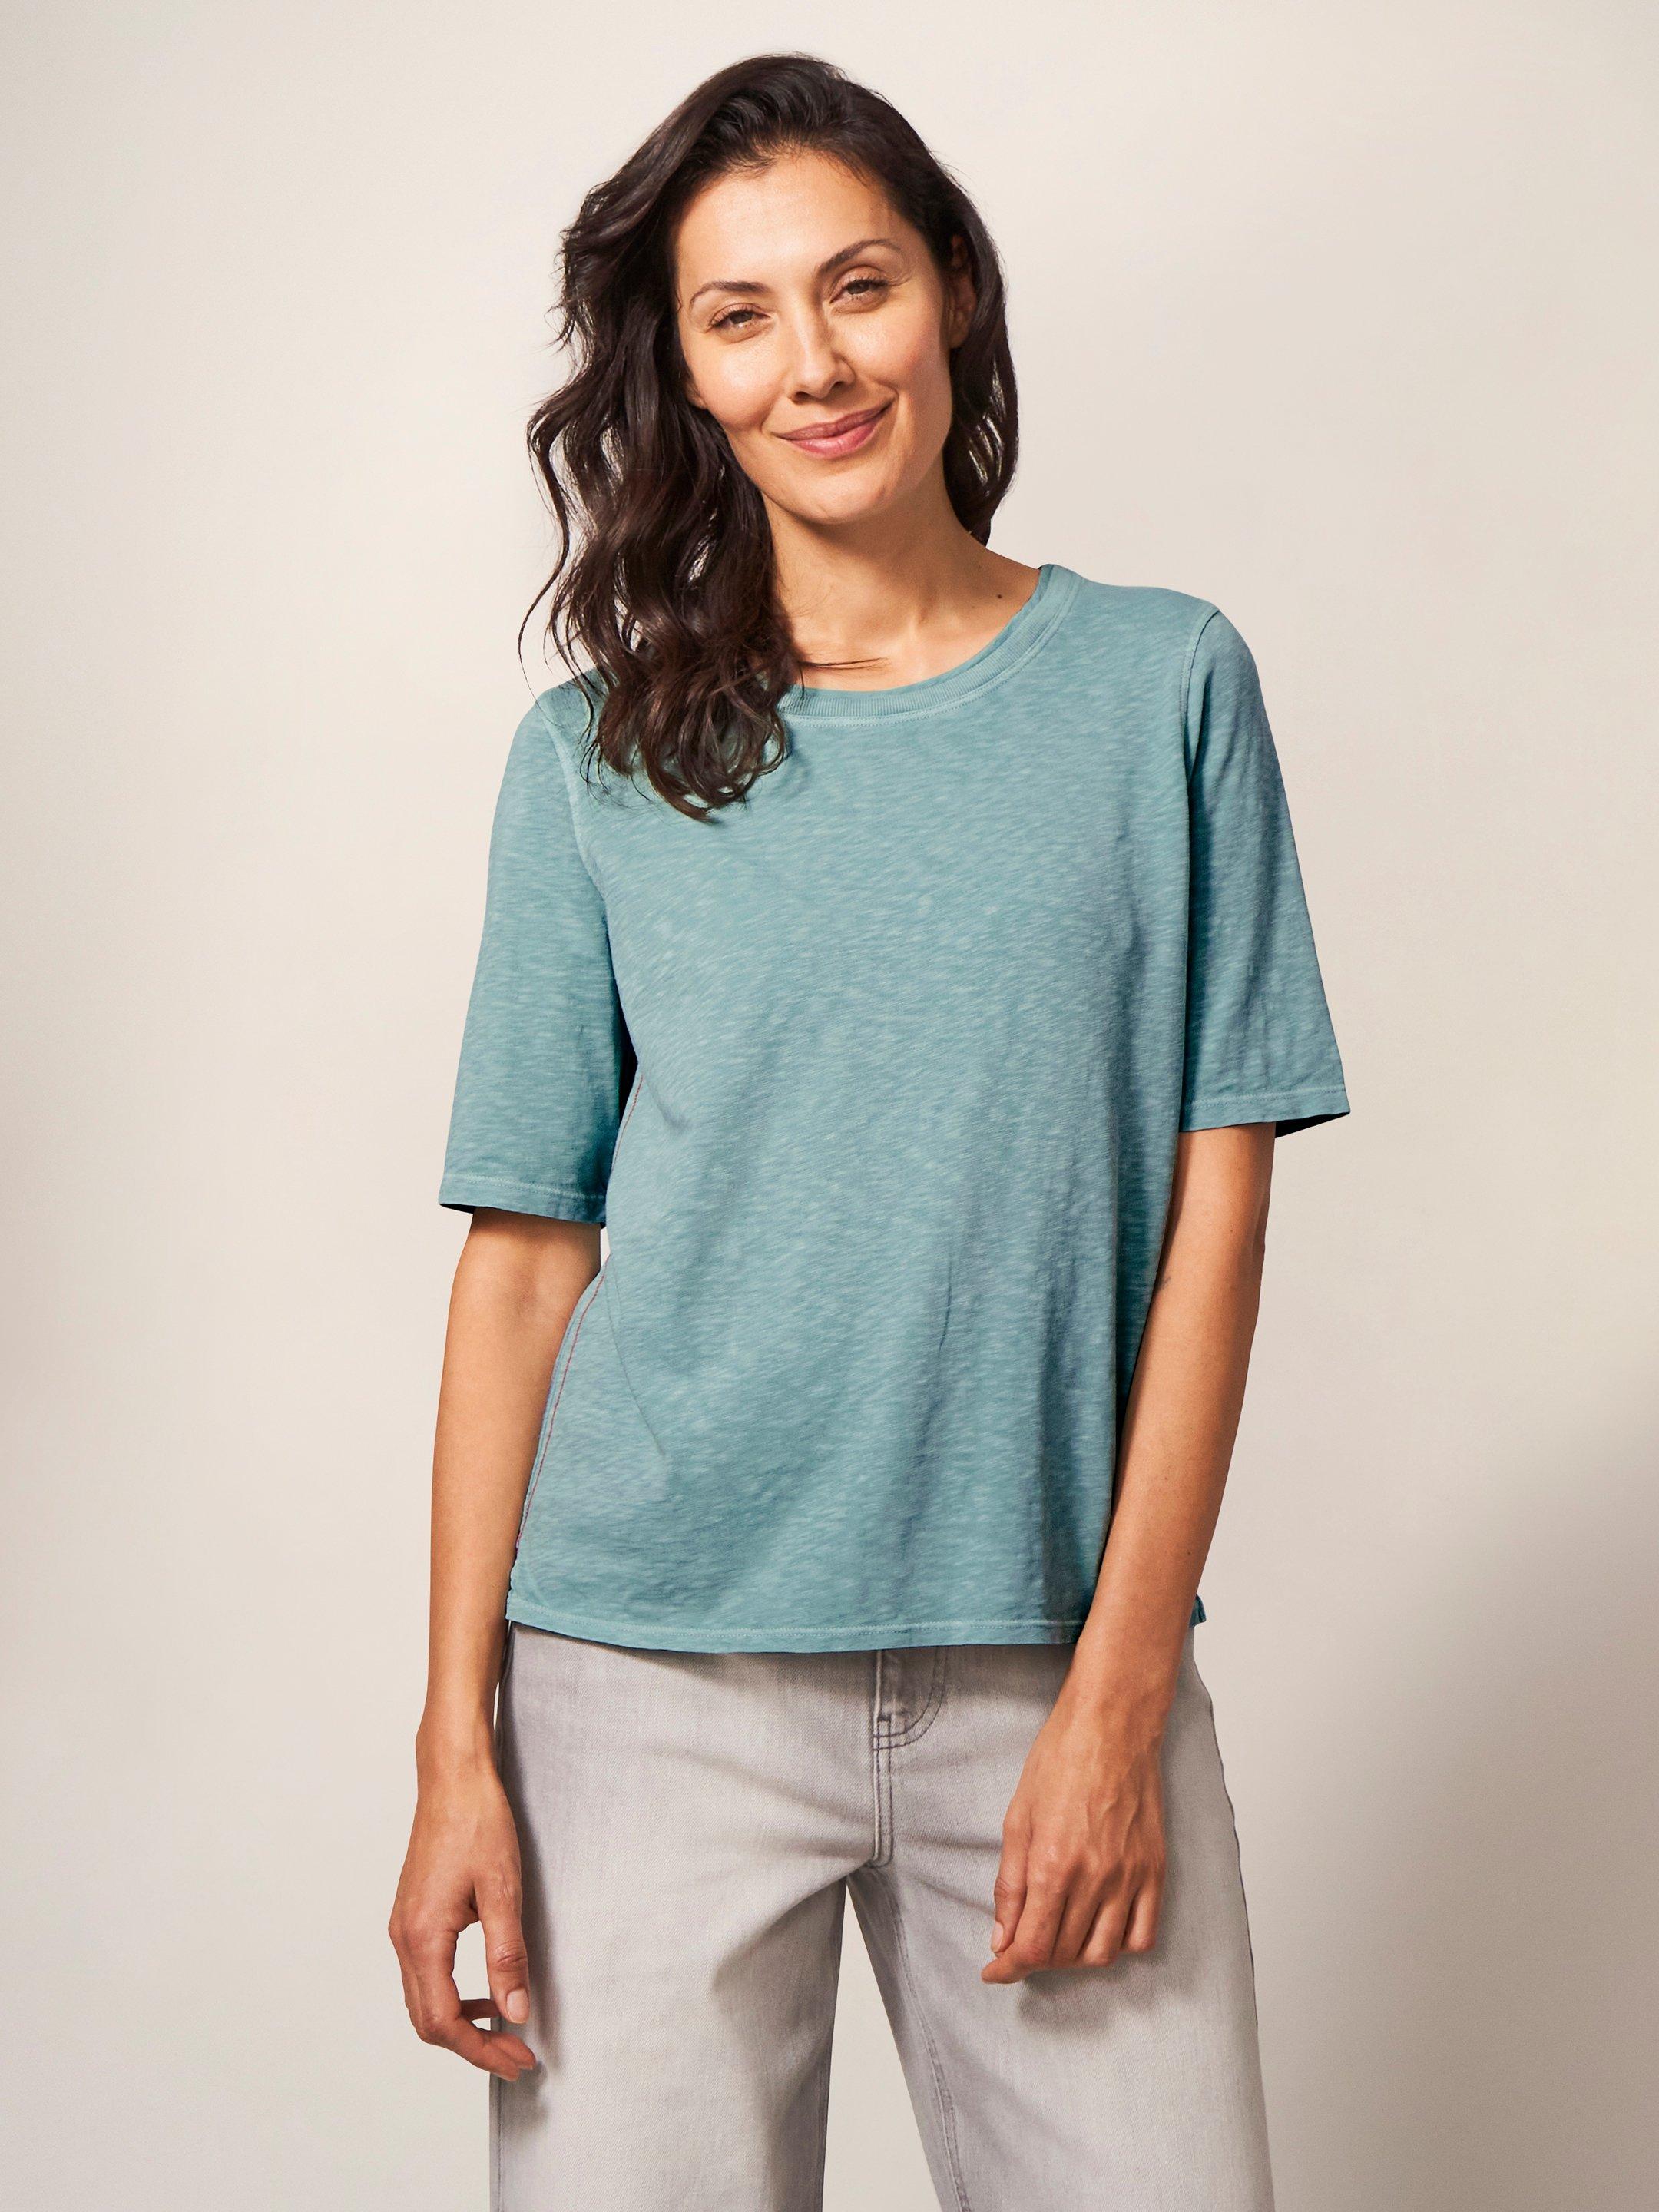 ANNABEL TEE in MID TEAL - MODEL FRONT